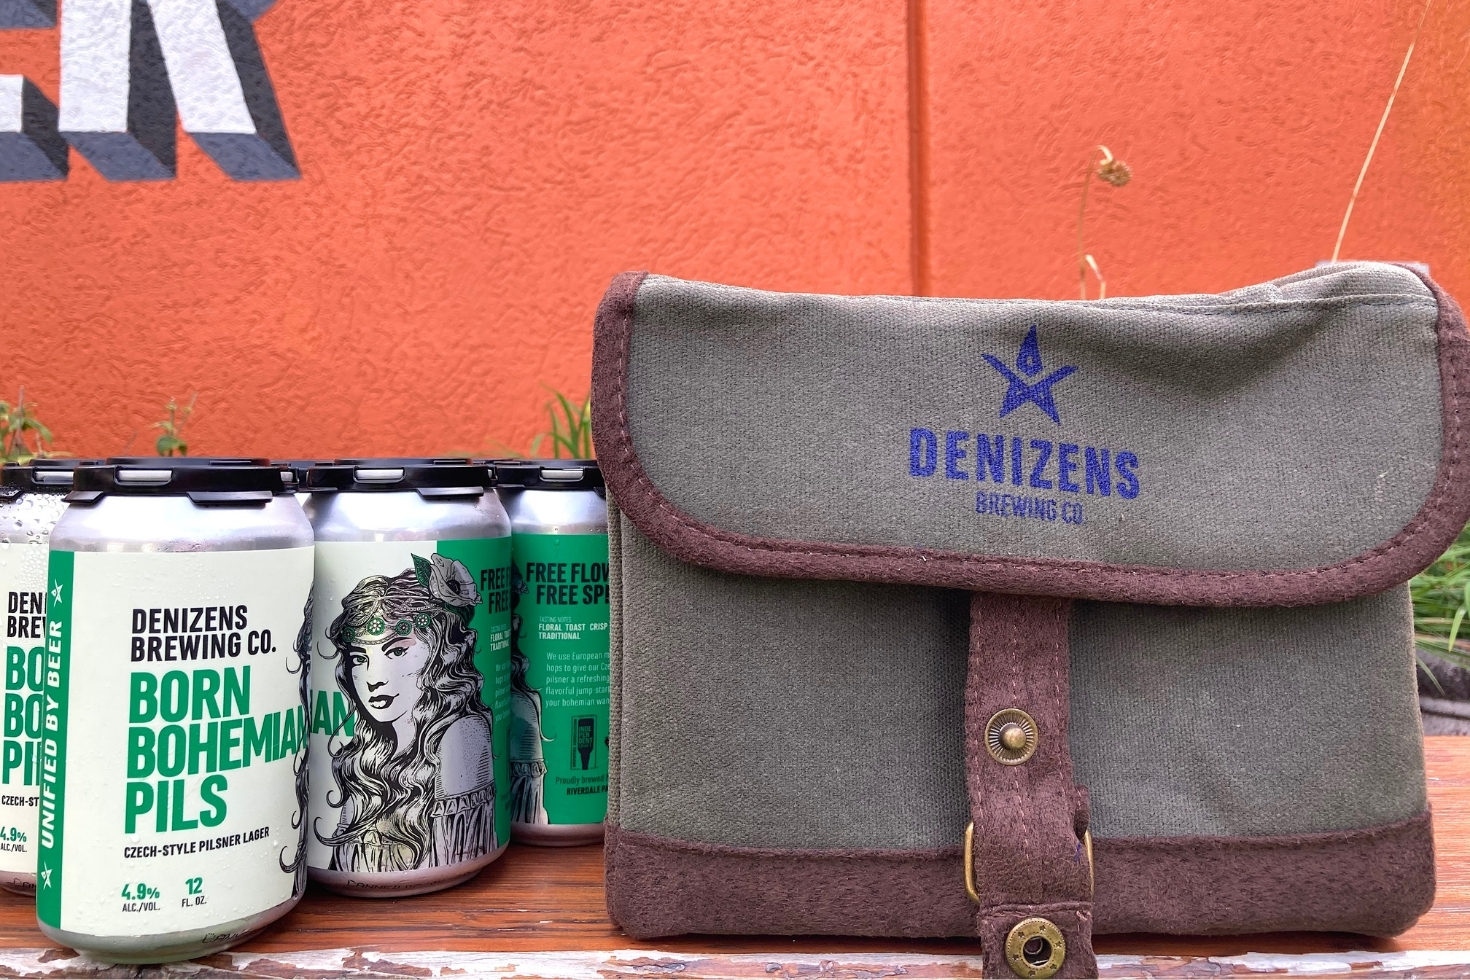 Cans of beer next to a canvas bag